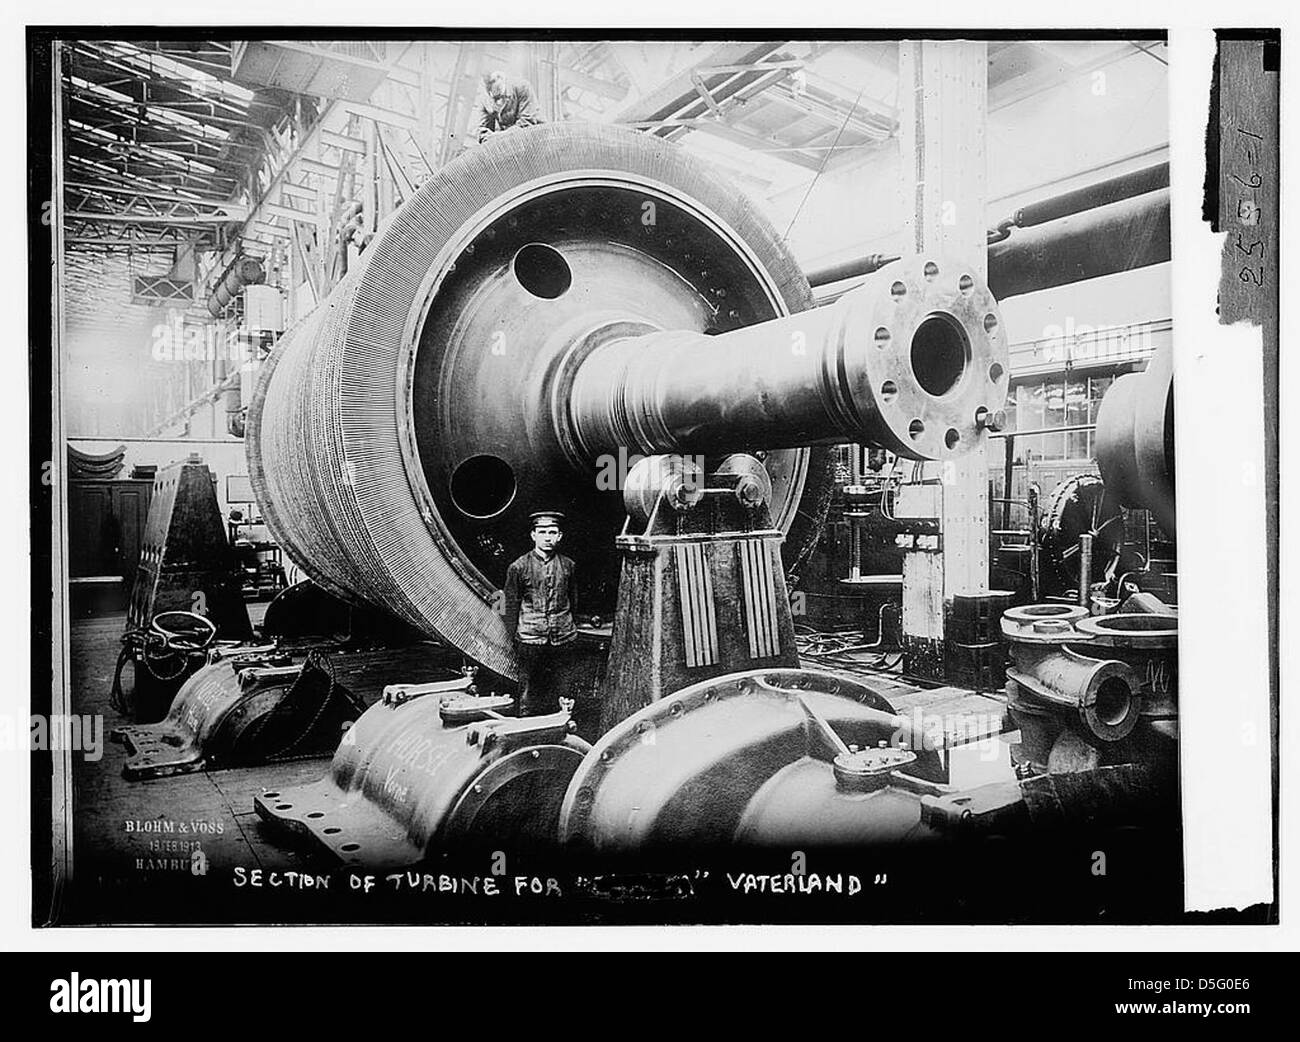 Section of Turbine for VATERLAND (LOC) Stock Photo